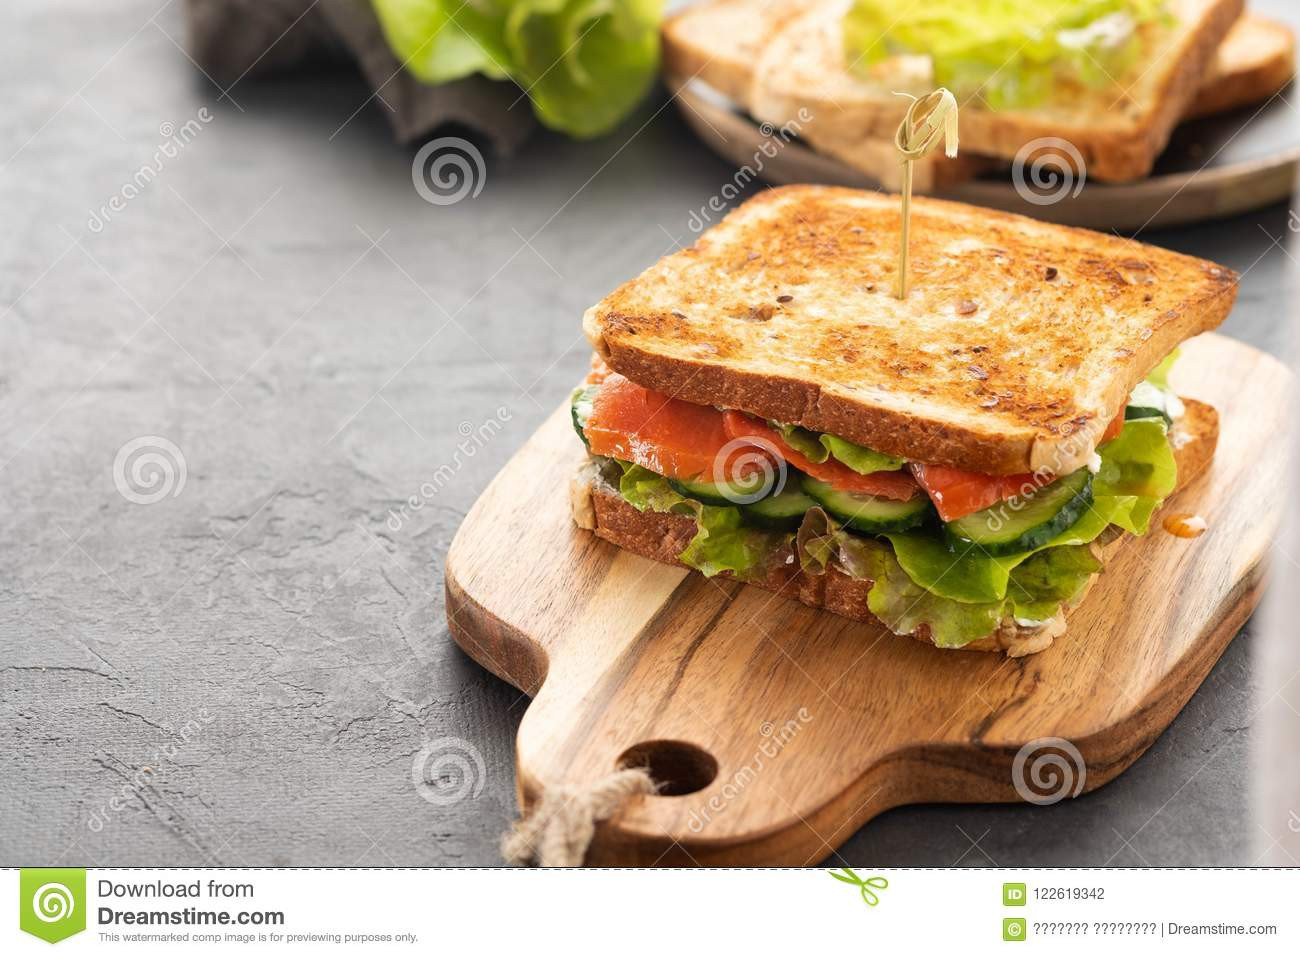 Calories In Grilled Cheese Sandwich On White Bread
 how many calories in a ham and cheese sandwich on white bread